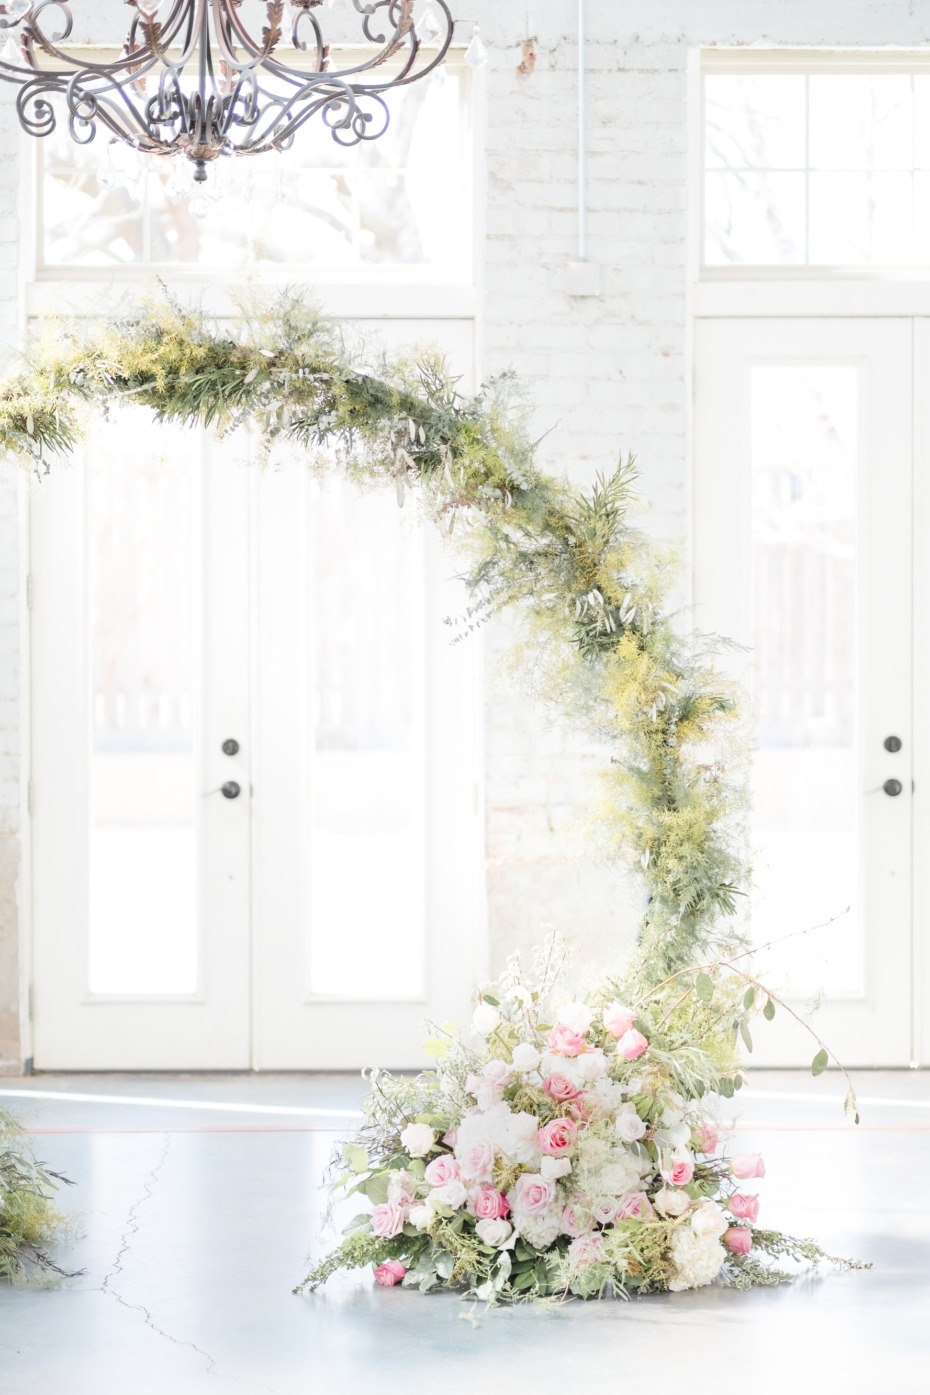 floral archway idea for your ceremony